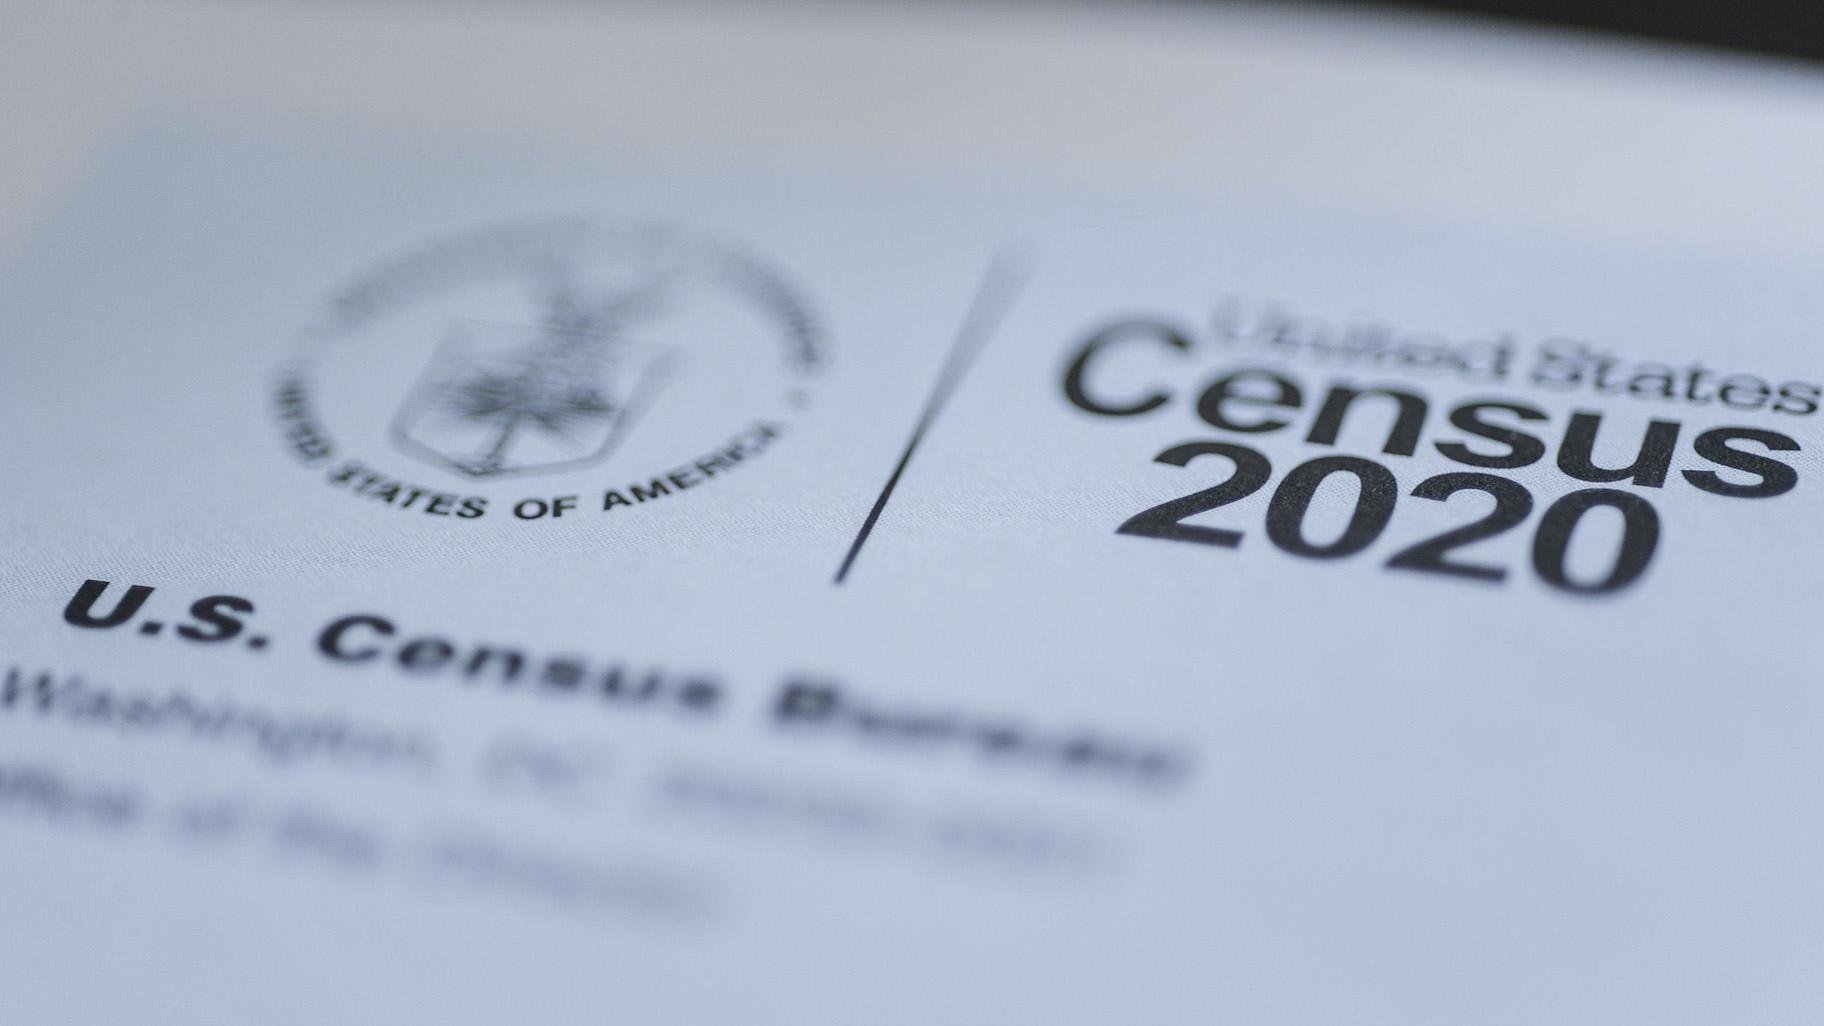 A form for the U.S. Census 2020 is photographed on March 18, 2020. The U.S. Census Bureau on Thursday, March 10, 2022, released two reports which measure how well the once-a-decade head count tallied every U.S. resident and whether certain populations were undercounted or overrepresented in the count. Any undercounts in various populations can shortchange the amount of funding and political representation they get over the next decade. (John Roark / The Idaho Post-Register via AP, File)